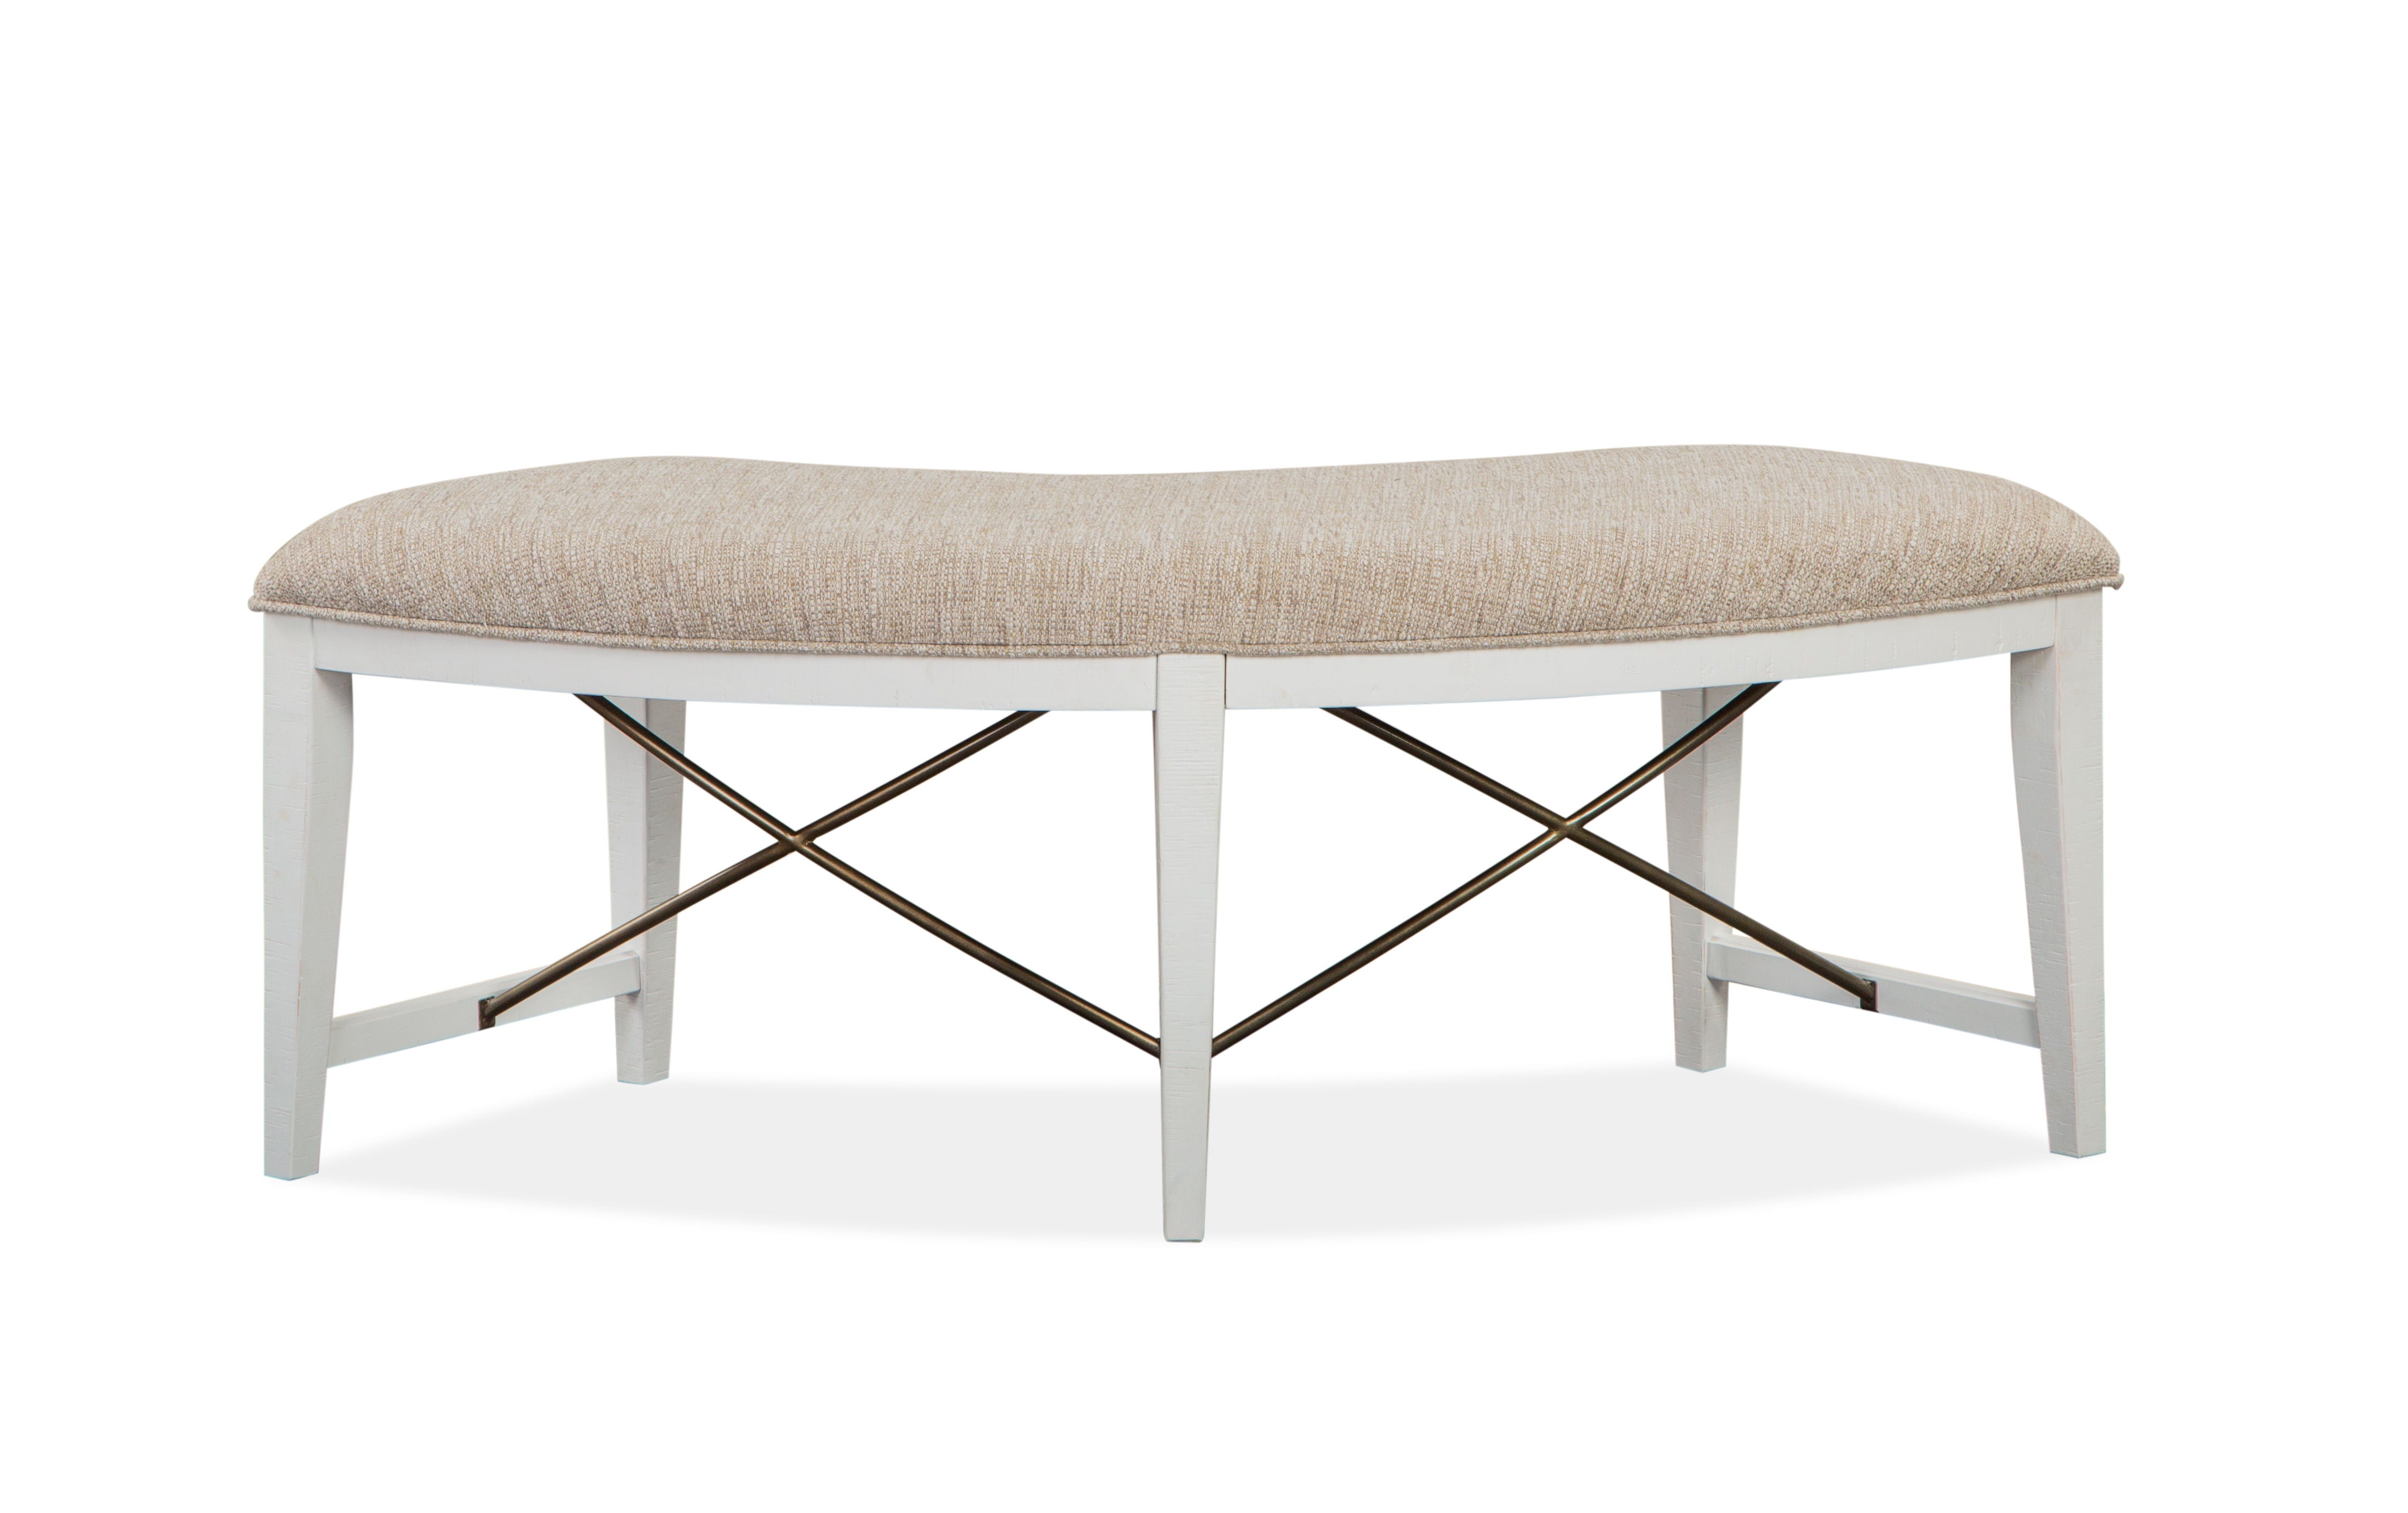 Heron Cove - Curved Bench With Upholstered Seat - Chalk White